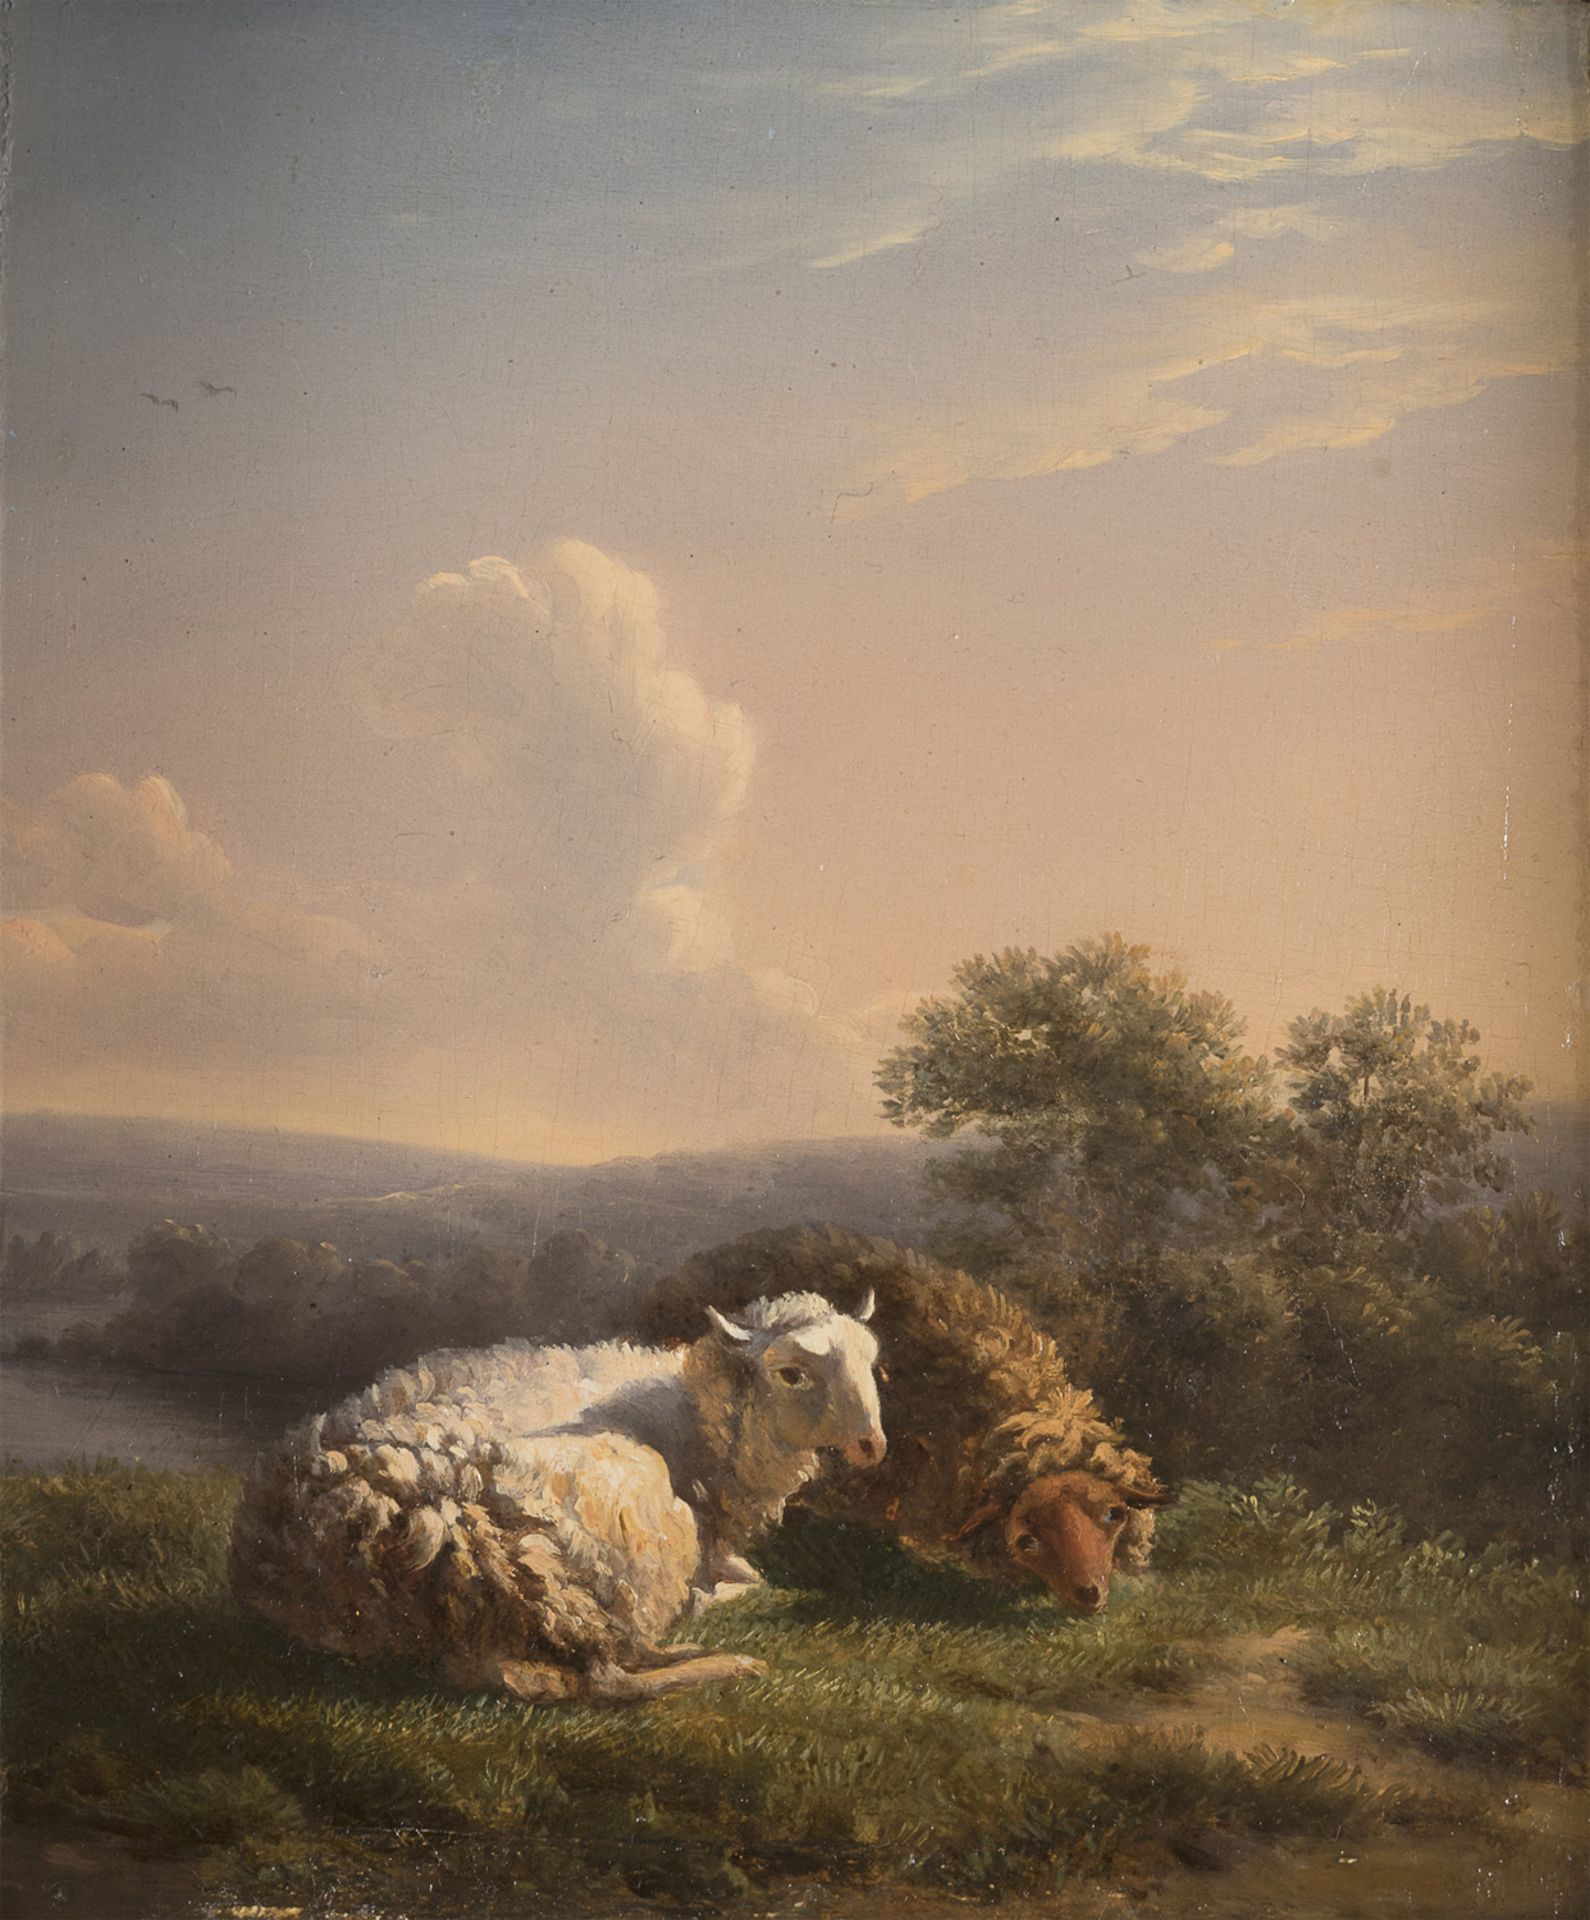 OIL PAINTING OF LANDSCAPE ATTRIBUTED TO JEAN LOUIS DE MARNE